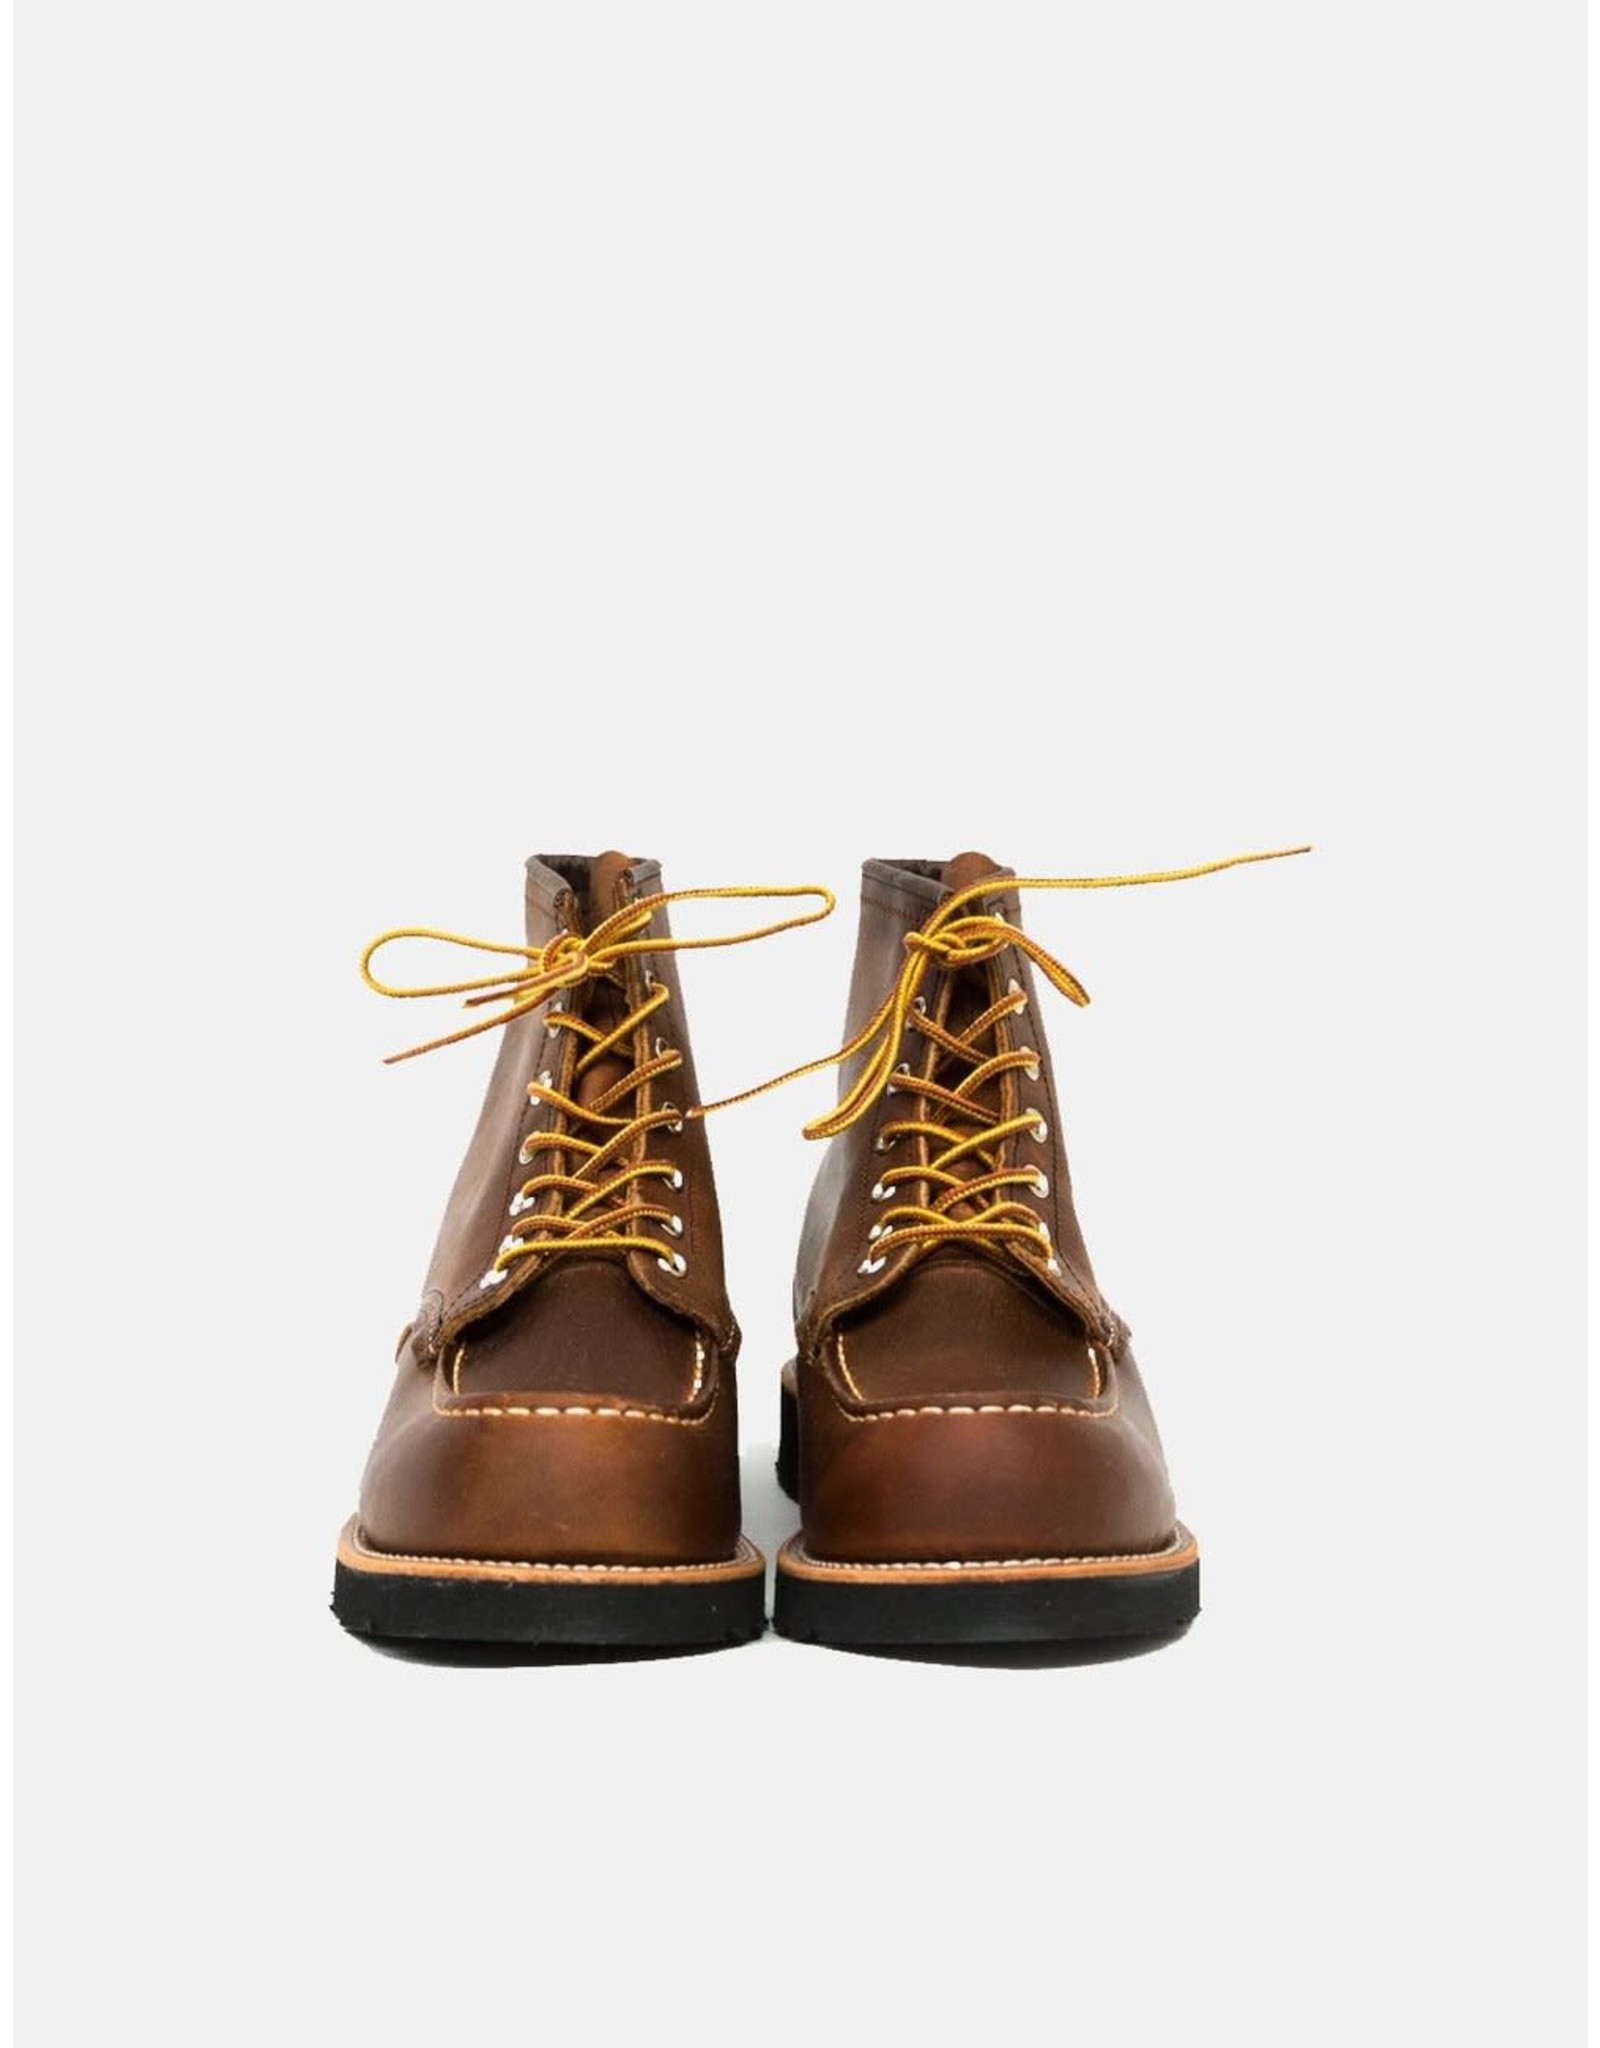 Red Wing Shoes Red Wing Shoes  8886 Heritage Moc Toe